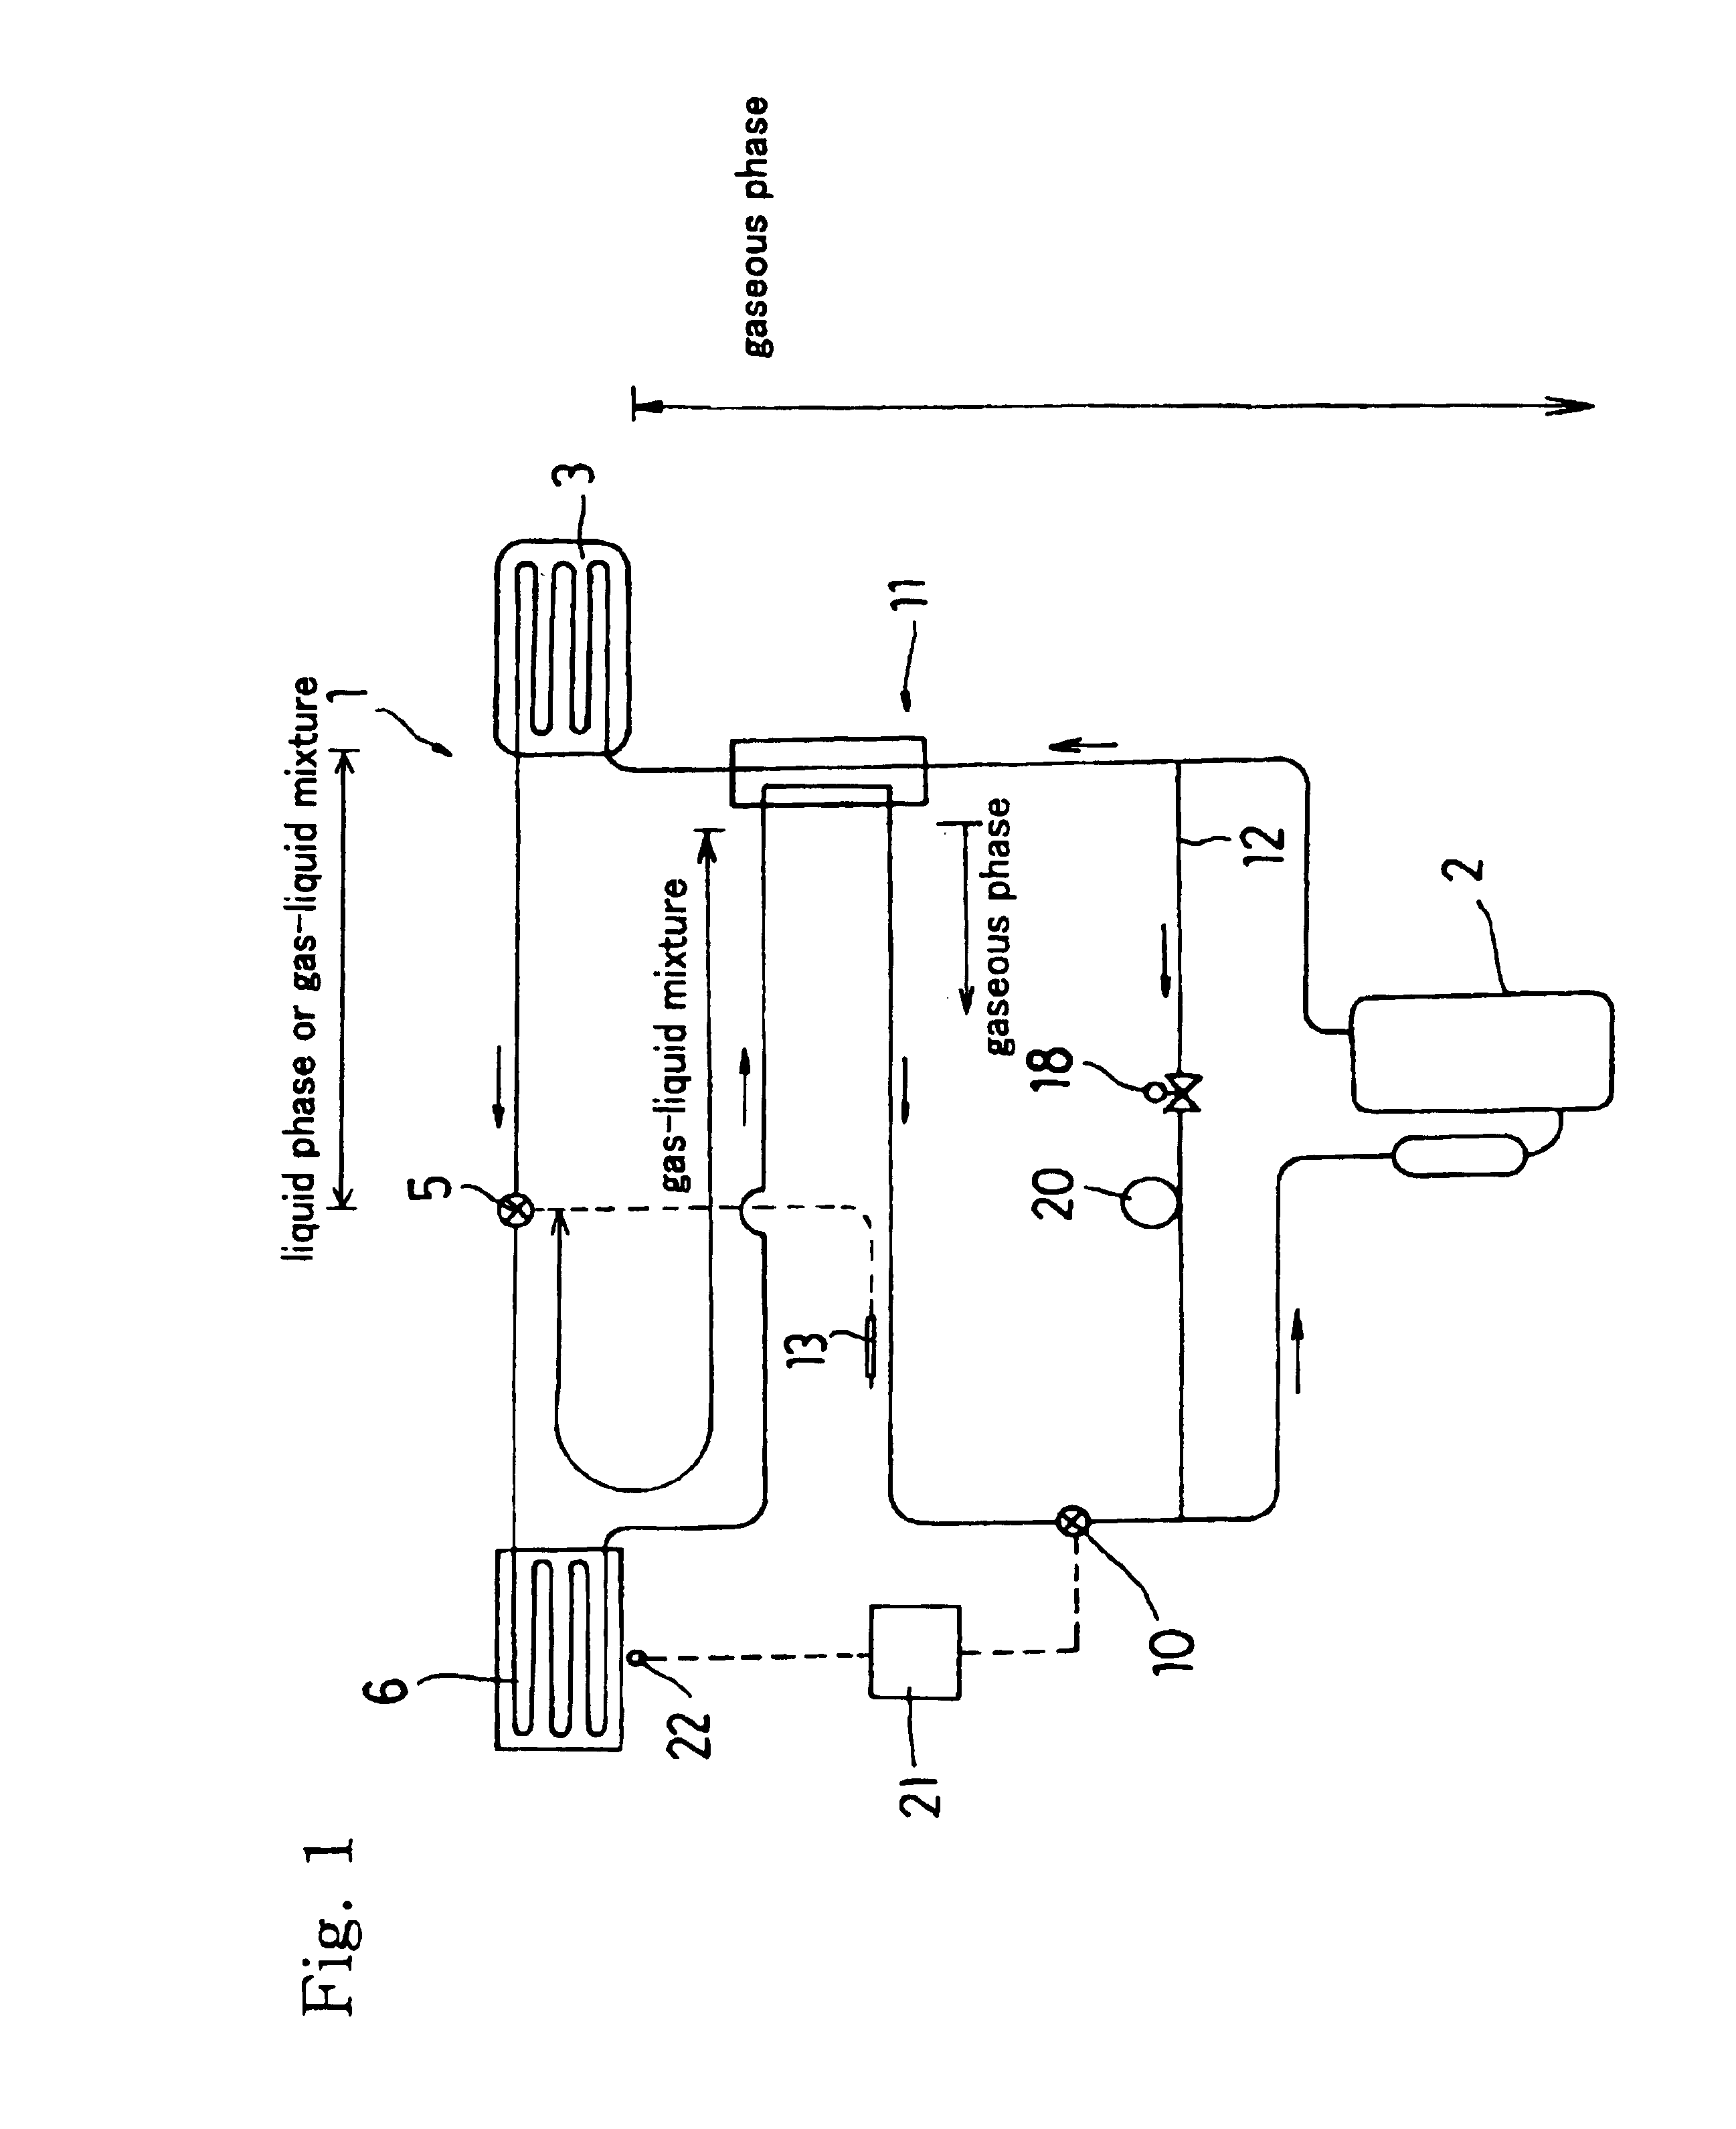 Cooling apparatus and a thermostat with the apparatus installed therein